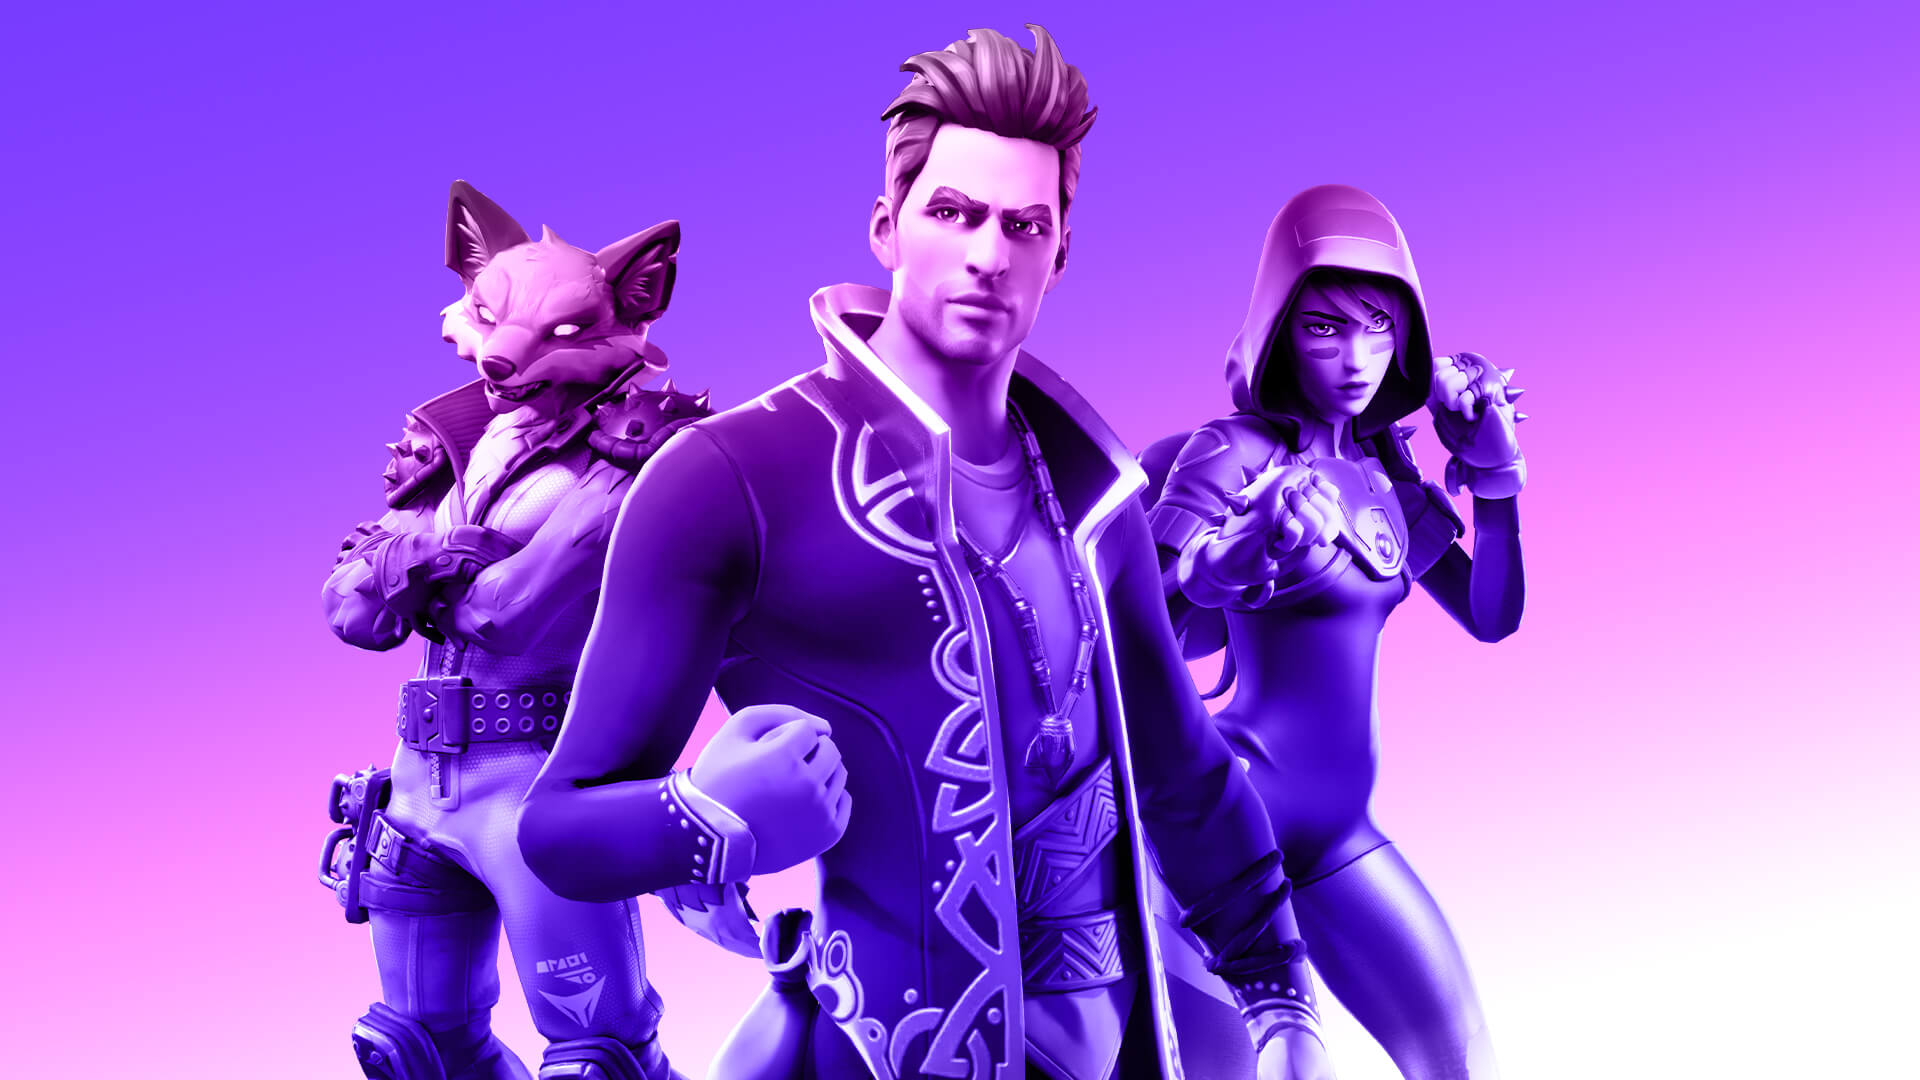 Three avatars from Fortnite against a purple background